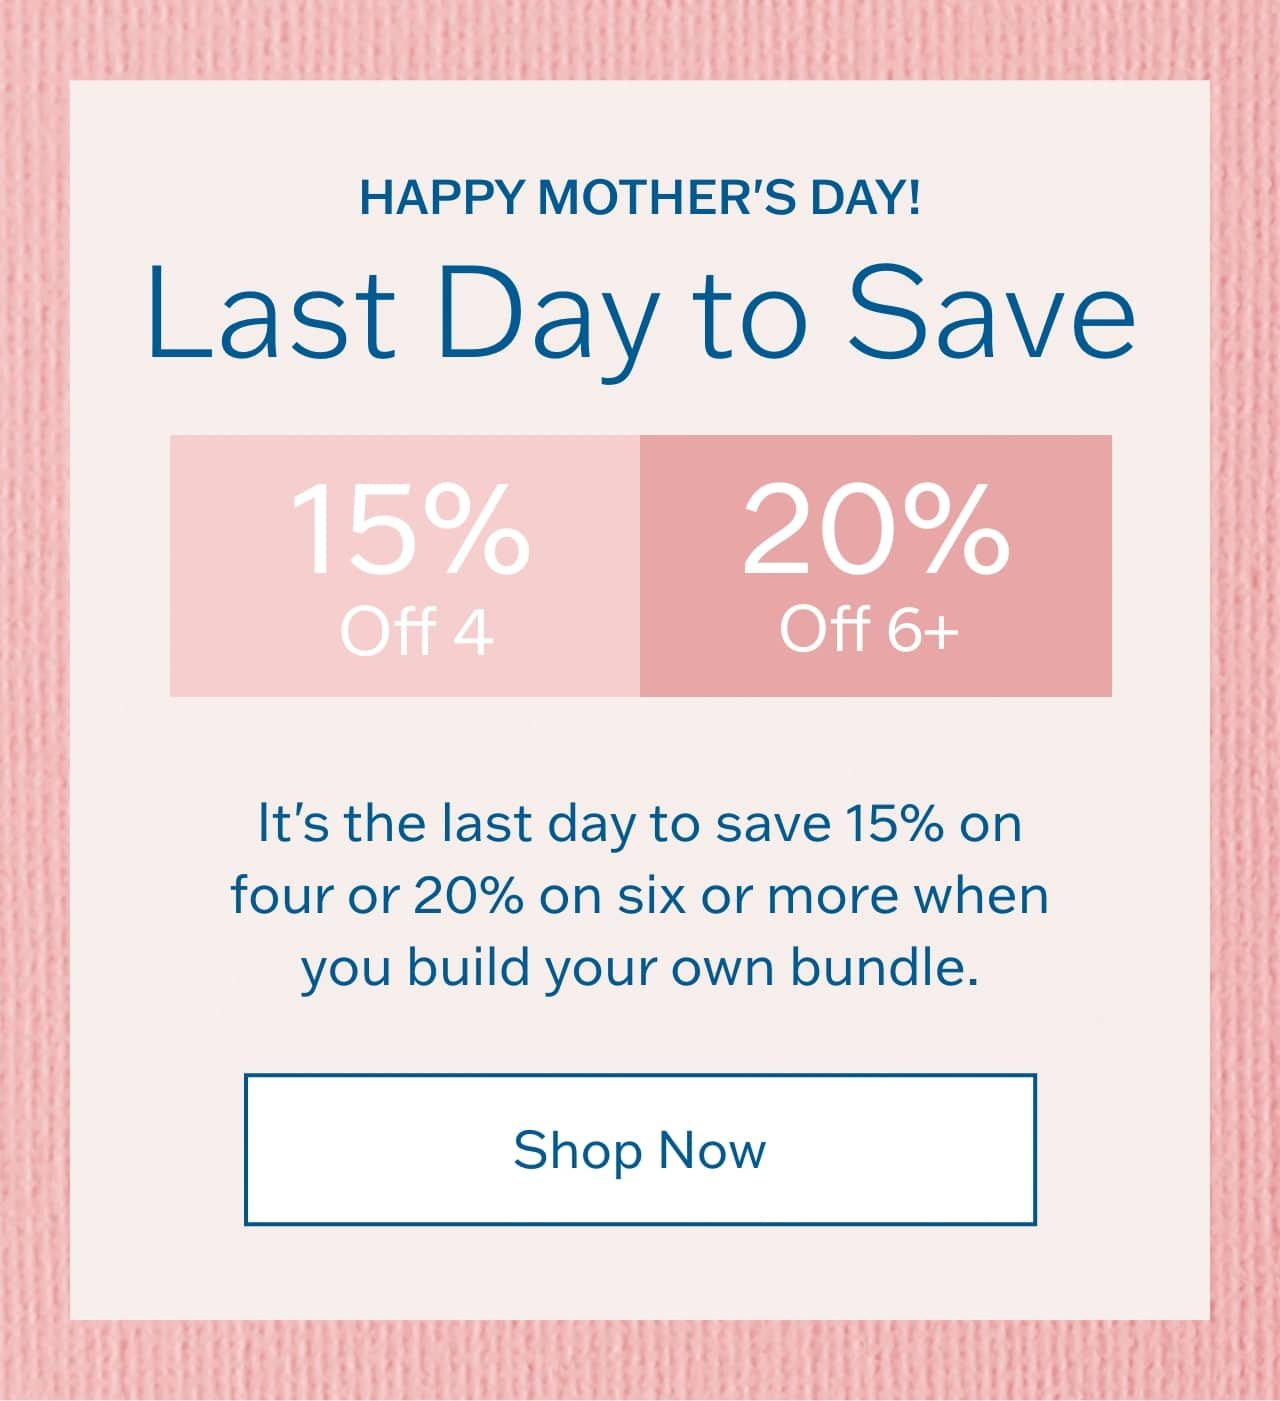 Happy Mother's Day! Last Day to Save. It's the last day to save 15% on four or 20% on six or more when you build your own bundle. Shop Now.